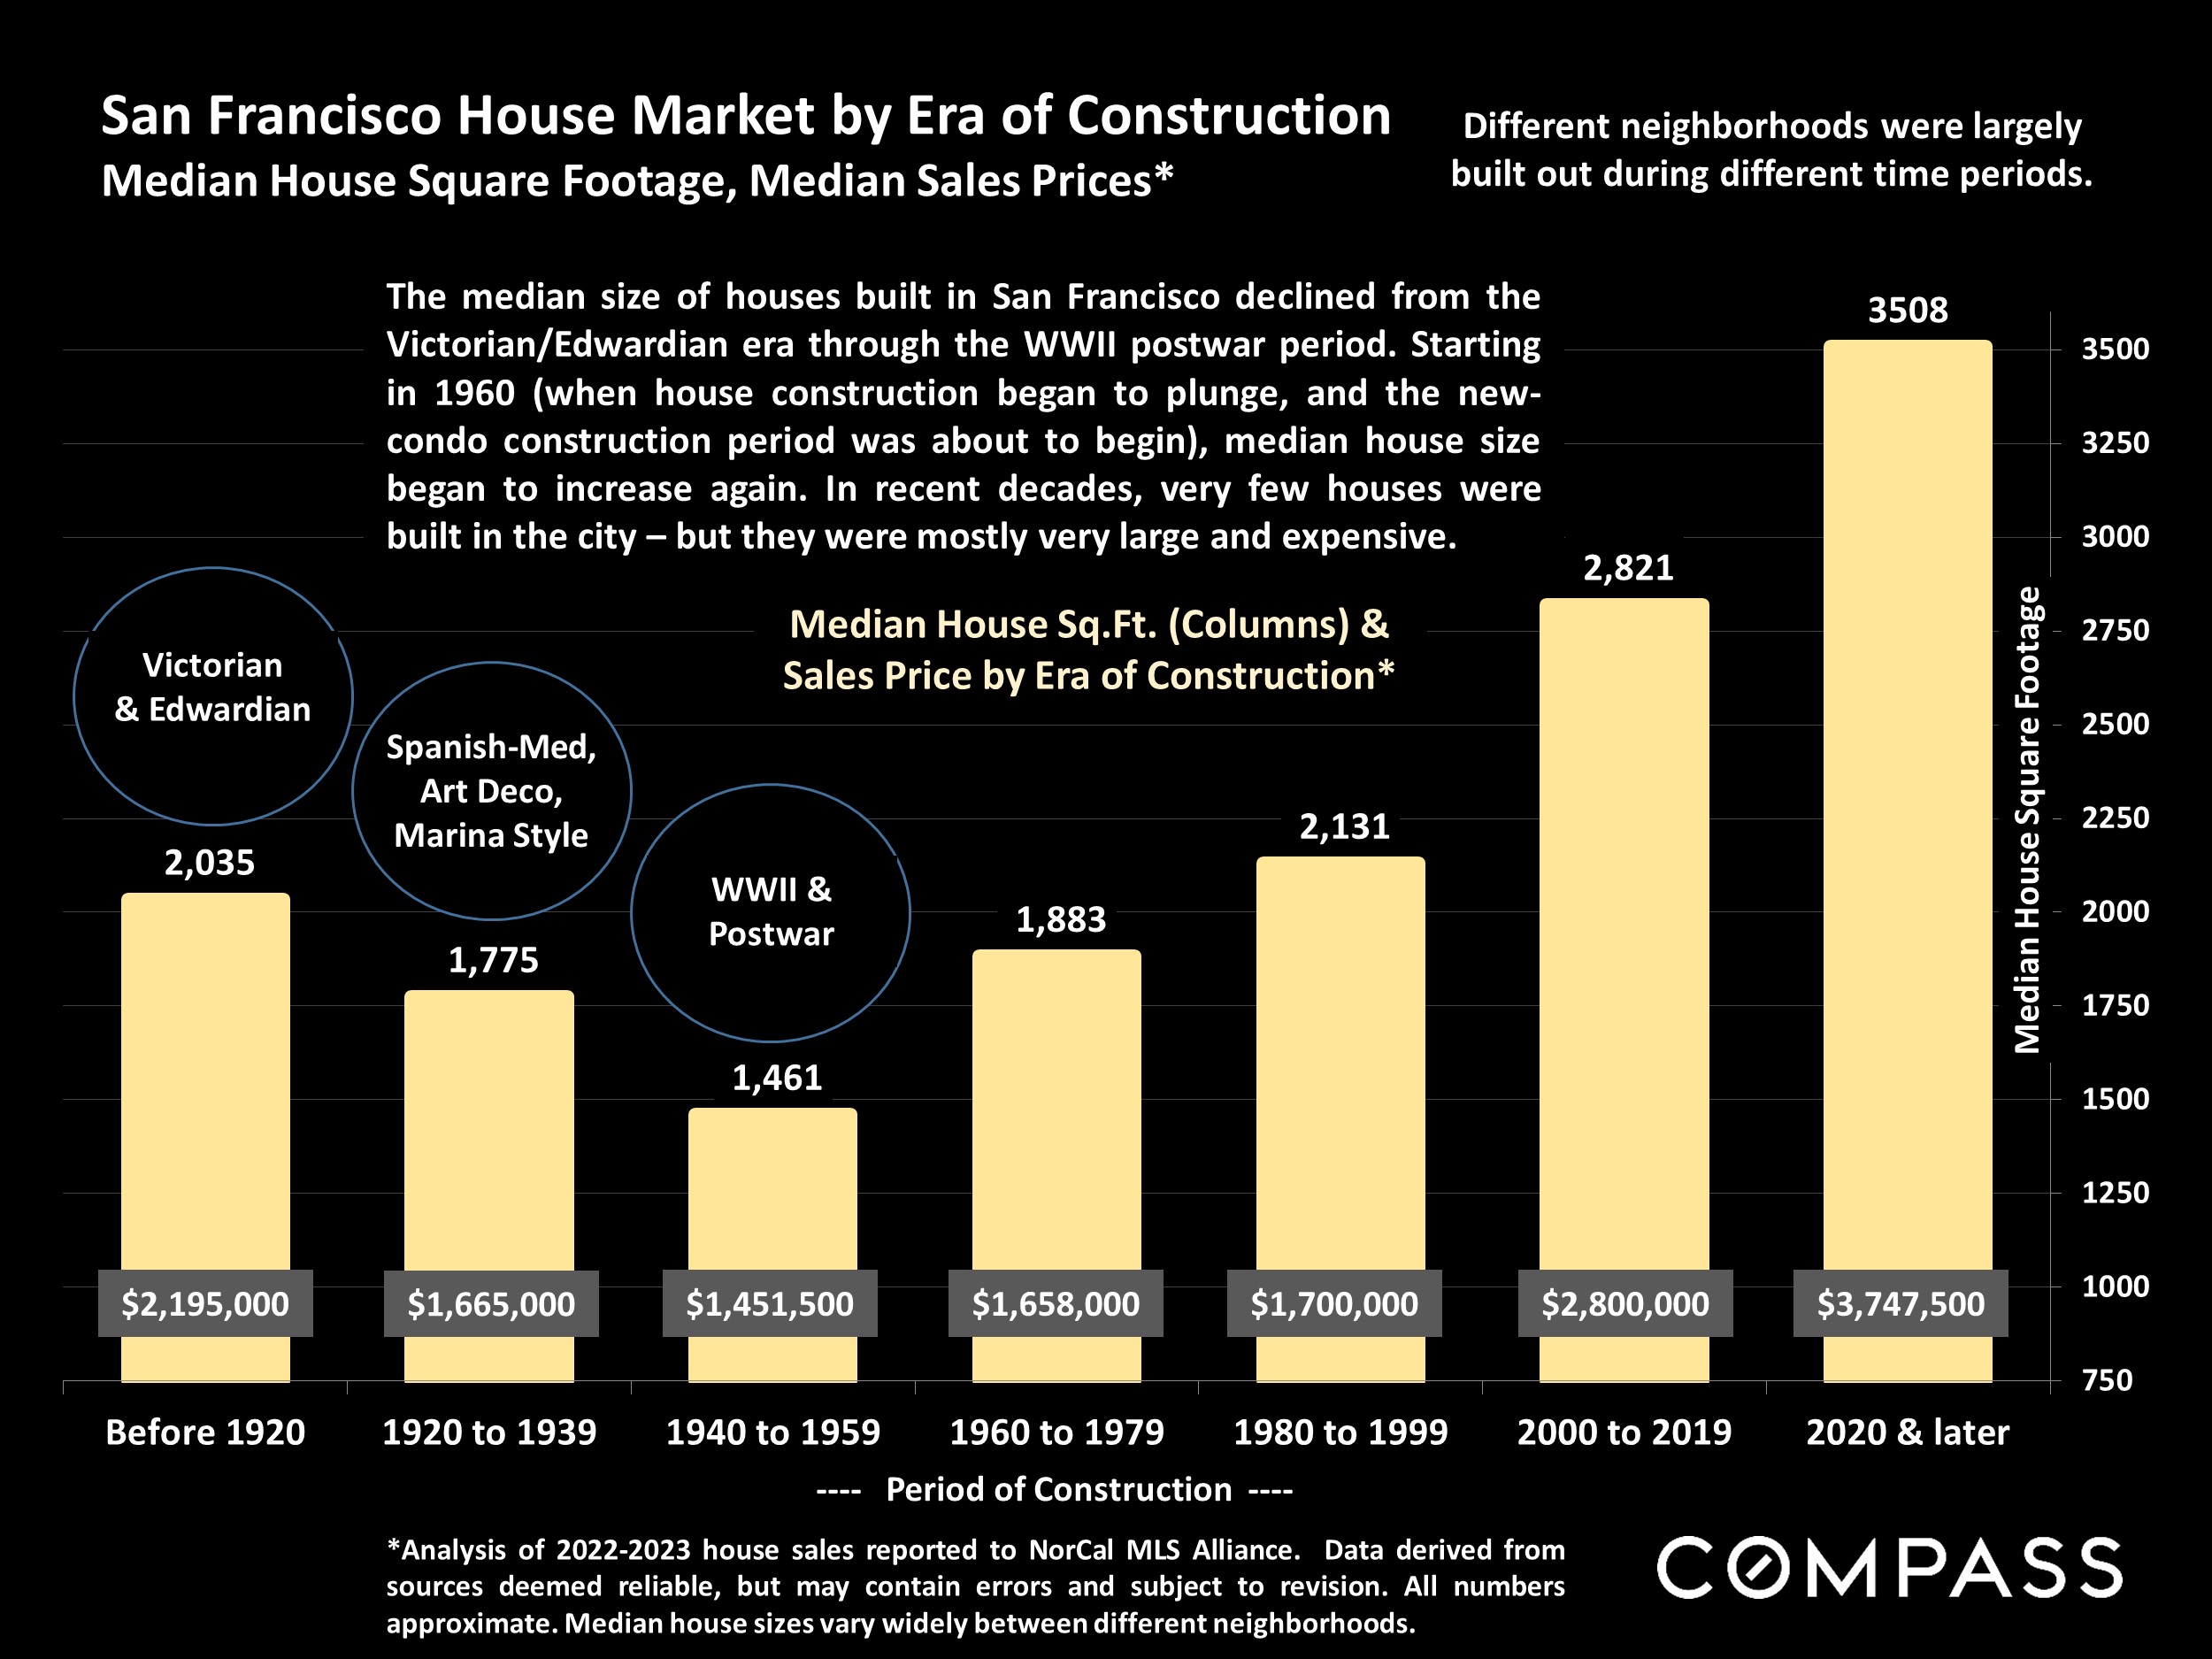 San Francisco House Market by Era of Construction Median House Square Footage, Median Sales Prices*